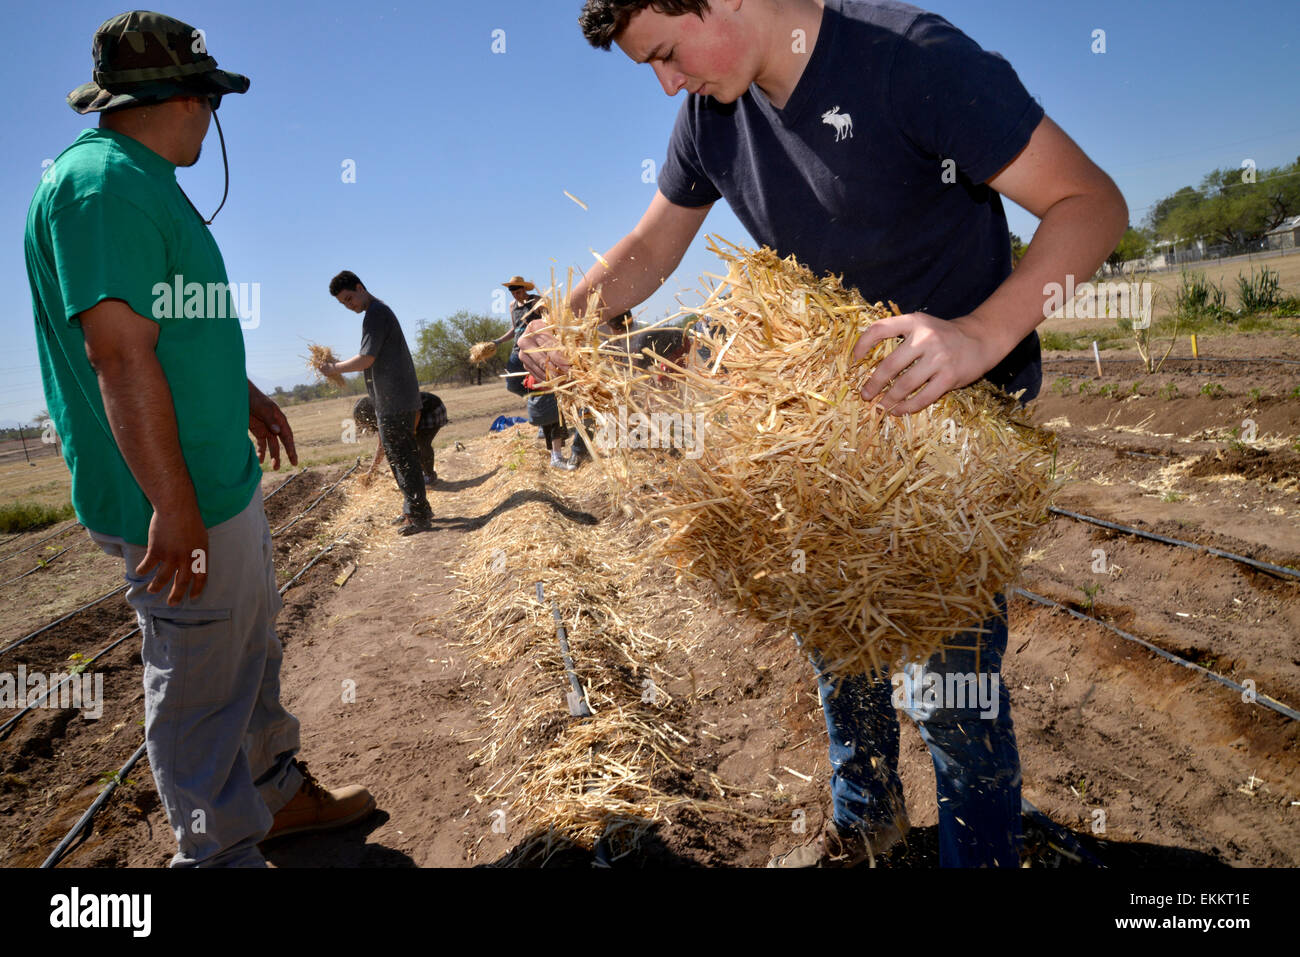 Student and adult volunteers work to produce food for needy families on a Chávez Day of Service, Tucson, Arizona, USA. Stock Photo